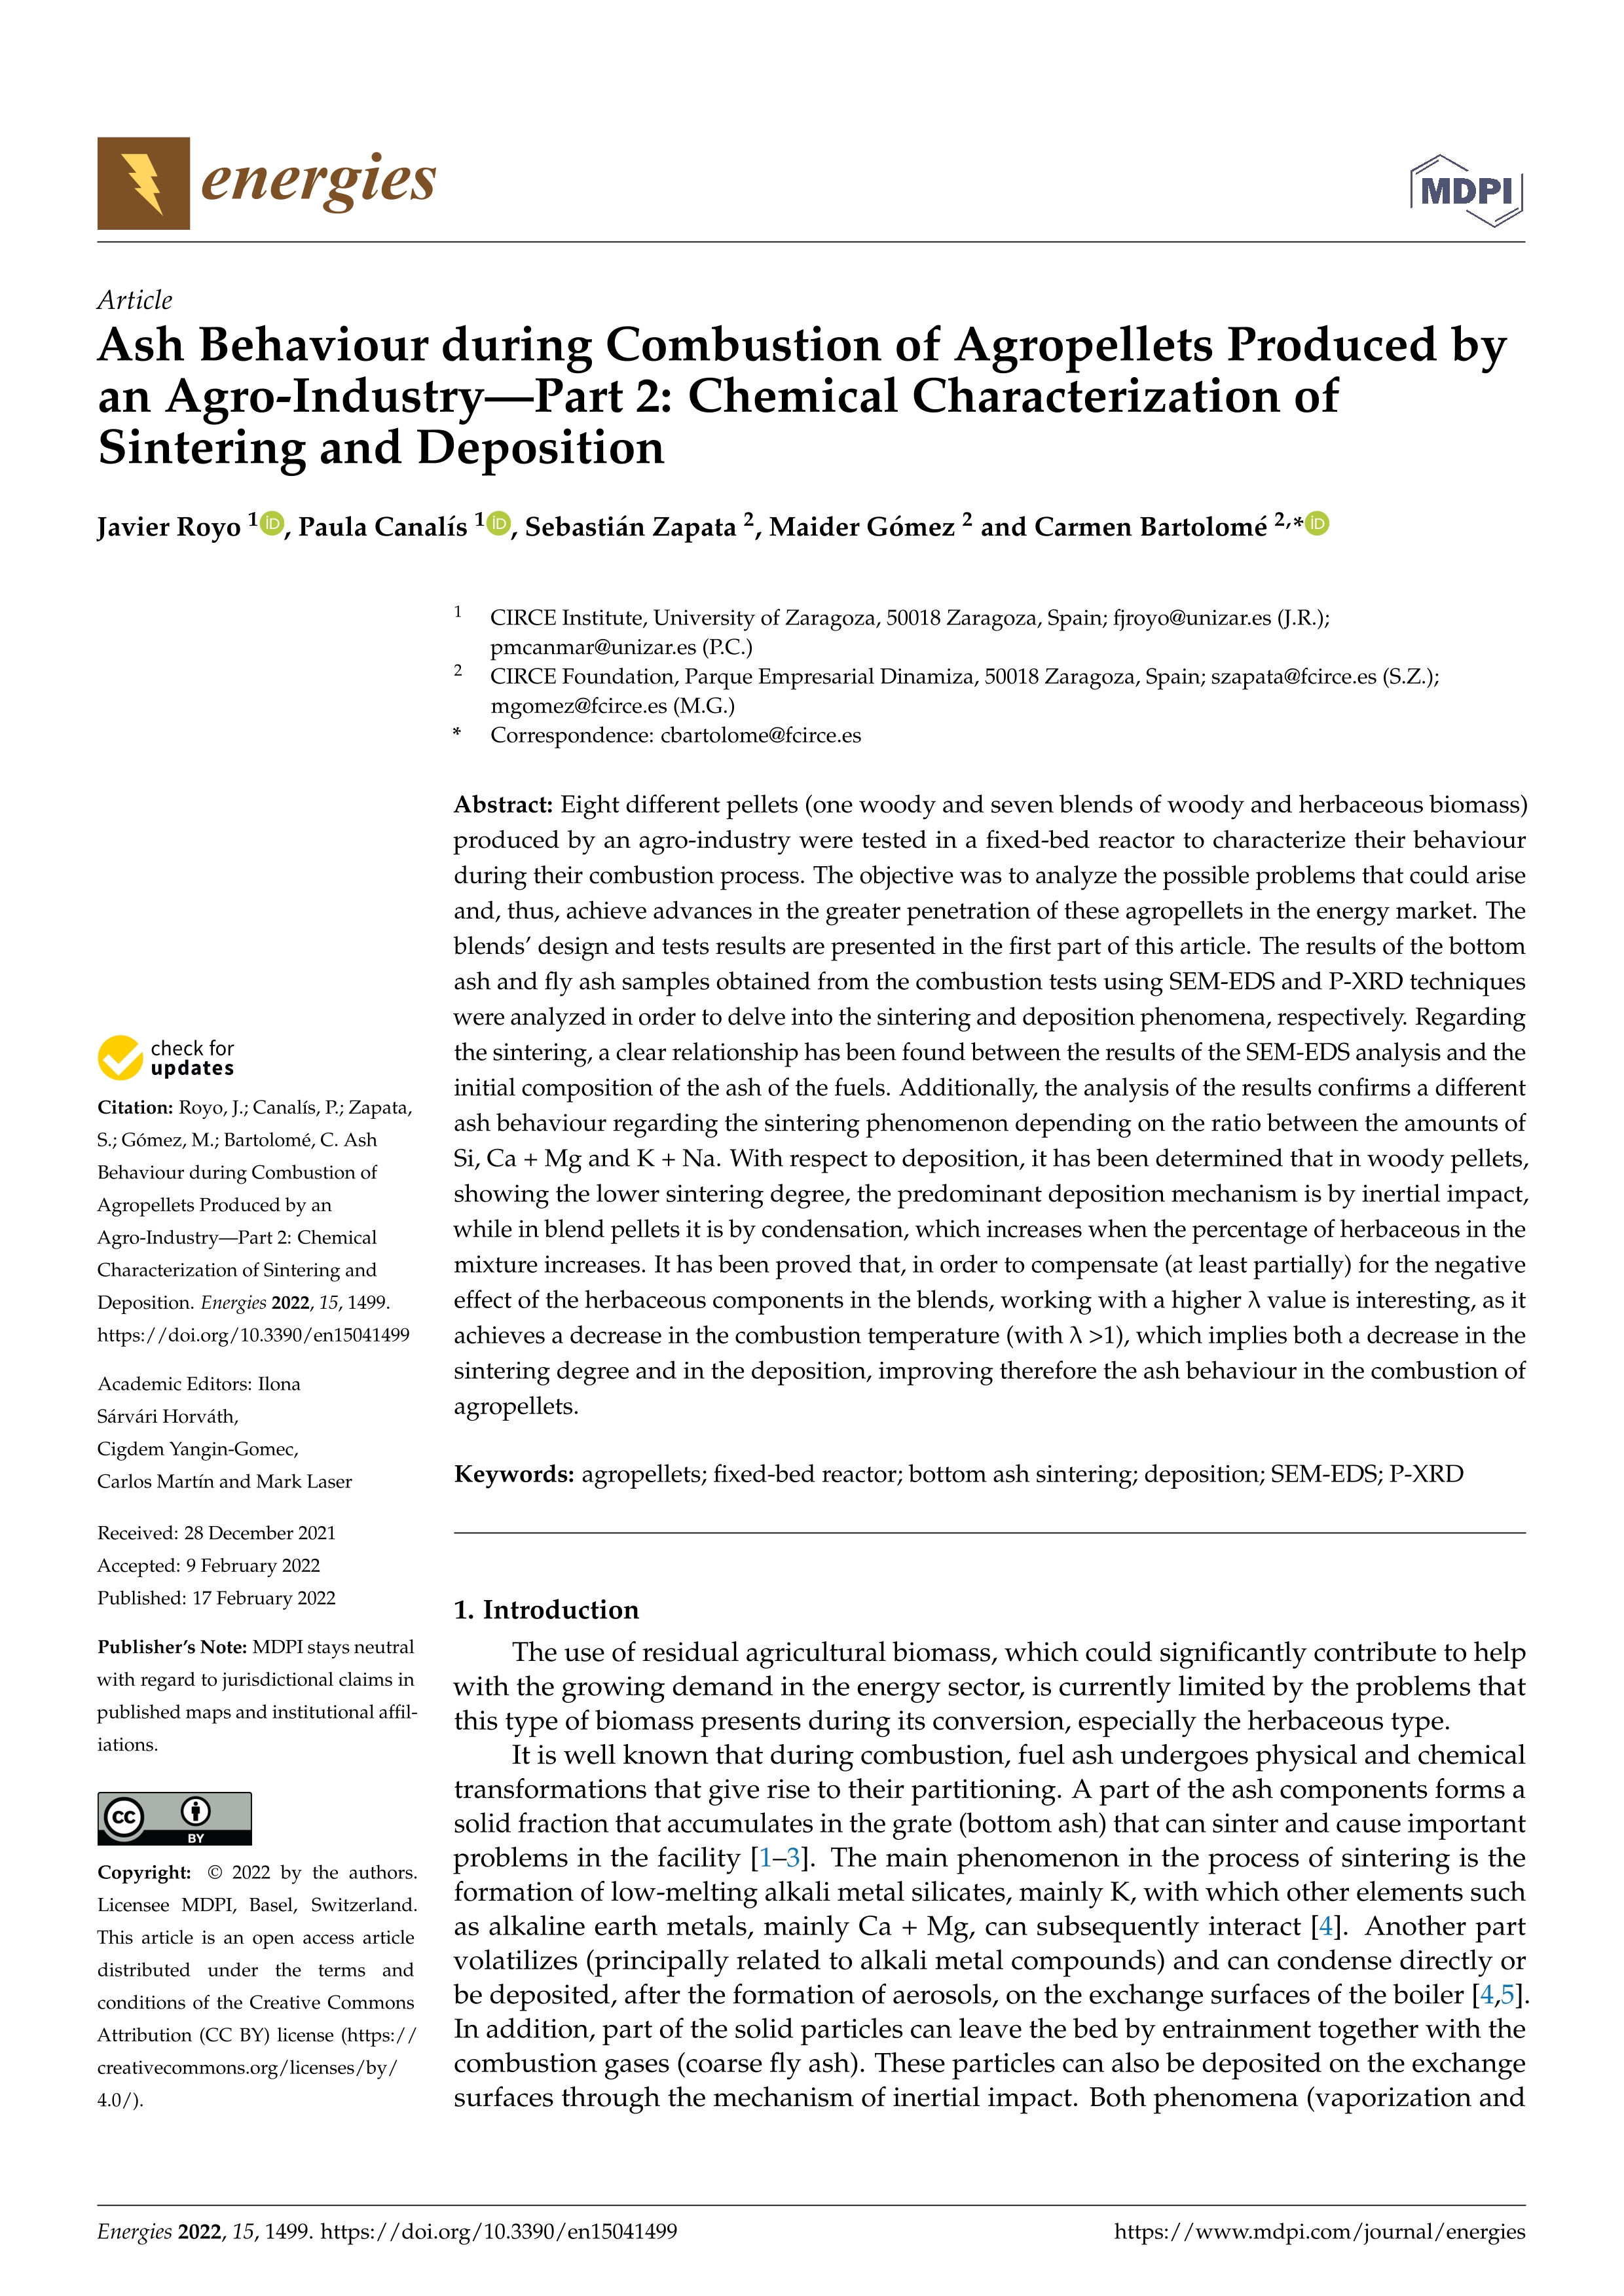 Ash Behaviour during Combustion of Agropellets Produced by an Agro-Industry—Part 2: Chemical Characterization of Sintering and Deposition